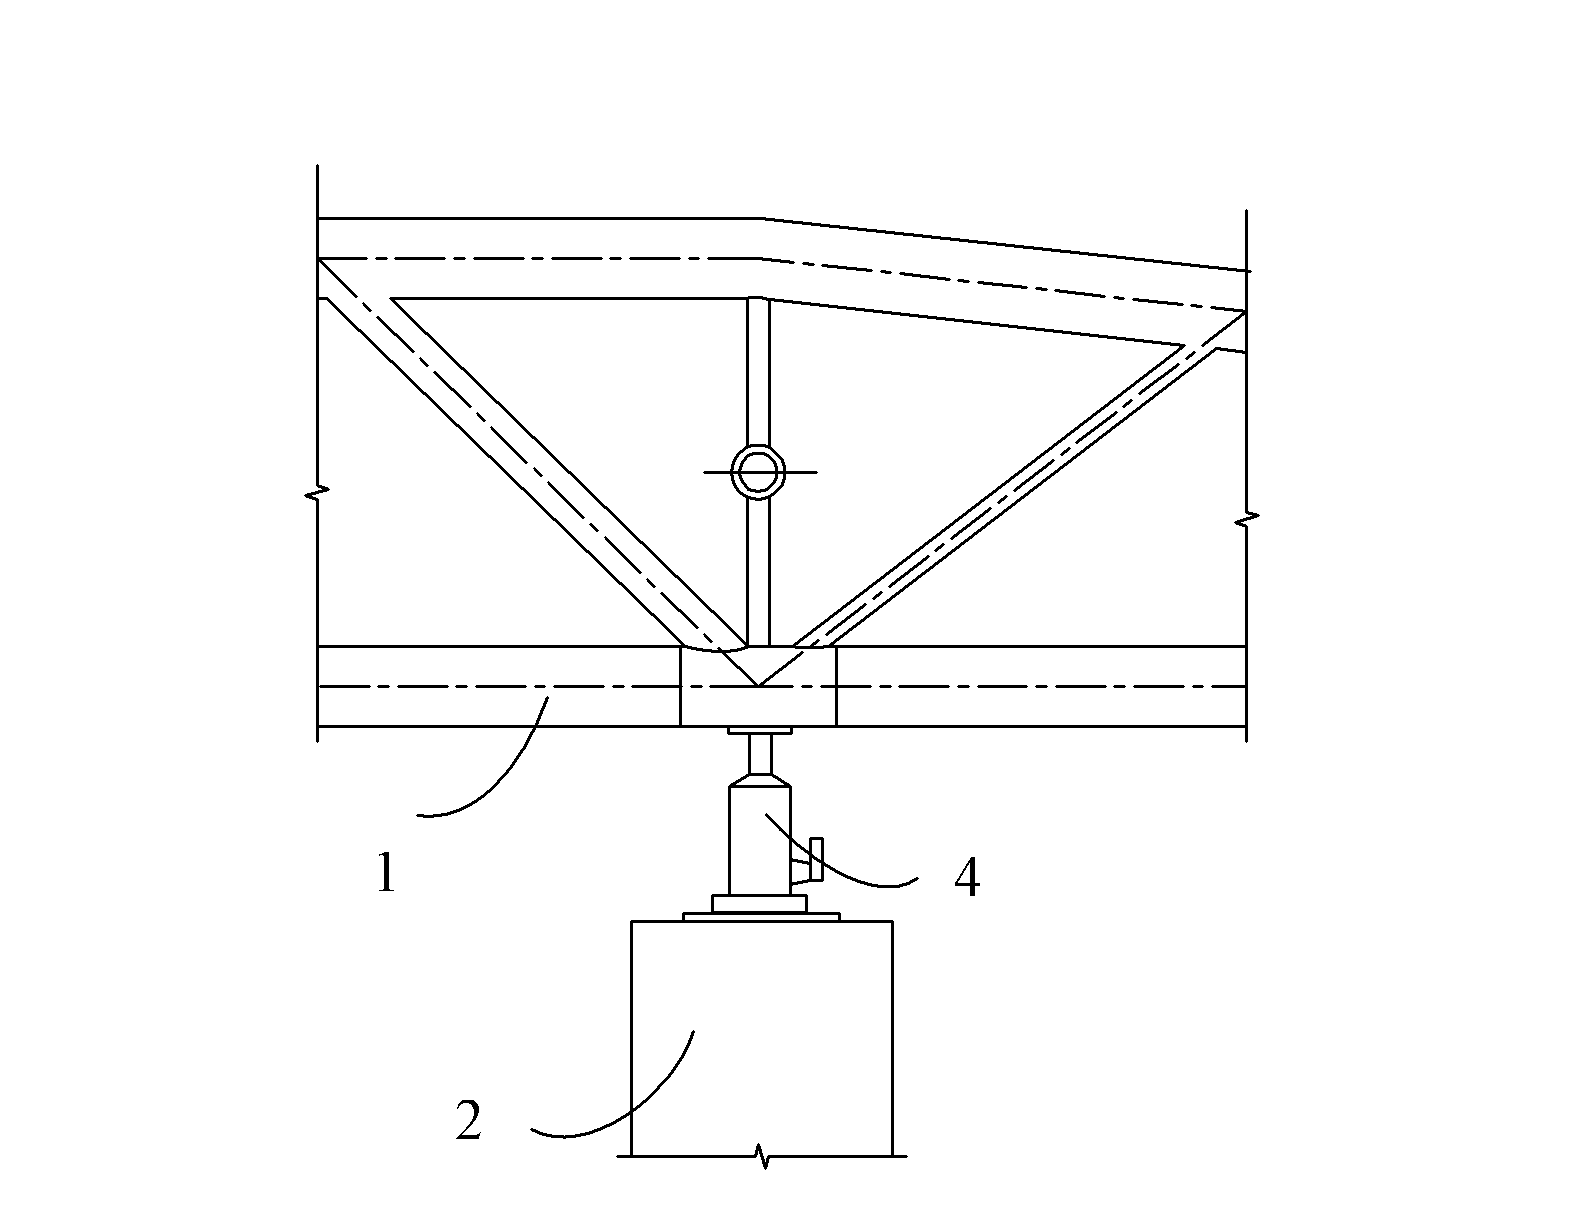 Unloading control method for steel structure temporary bracing